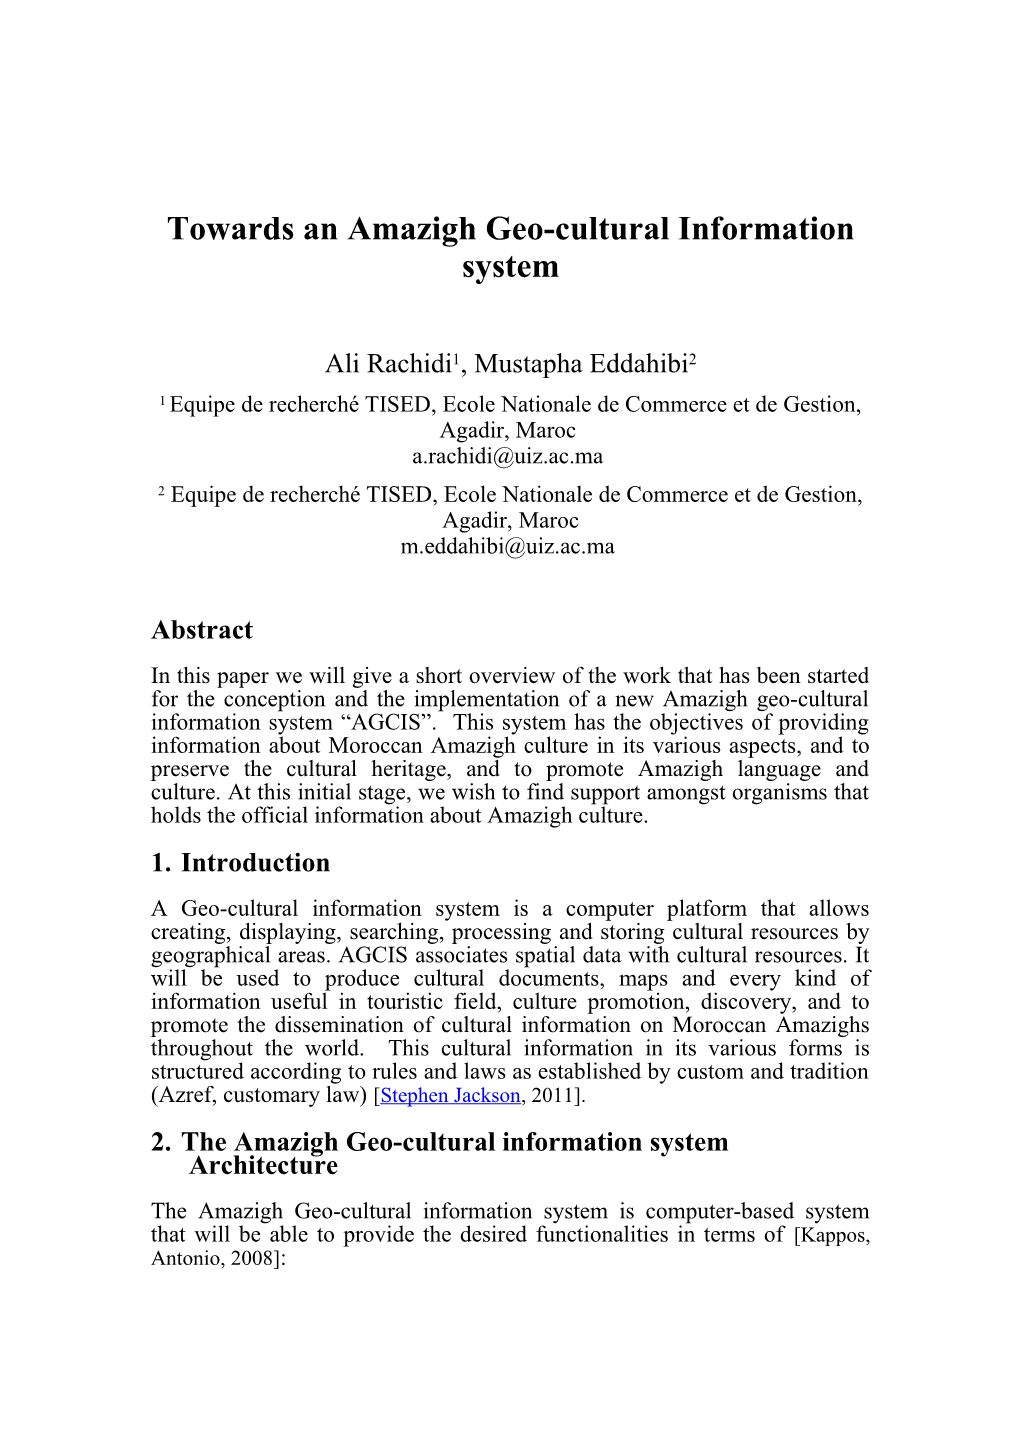 Towards an Amazigh Geo-Cultural Information System